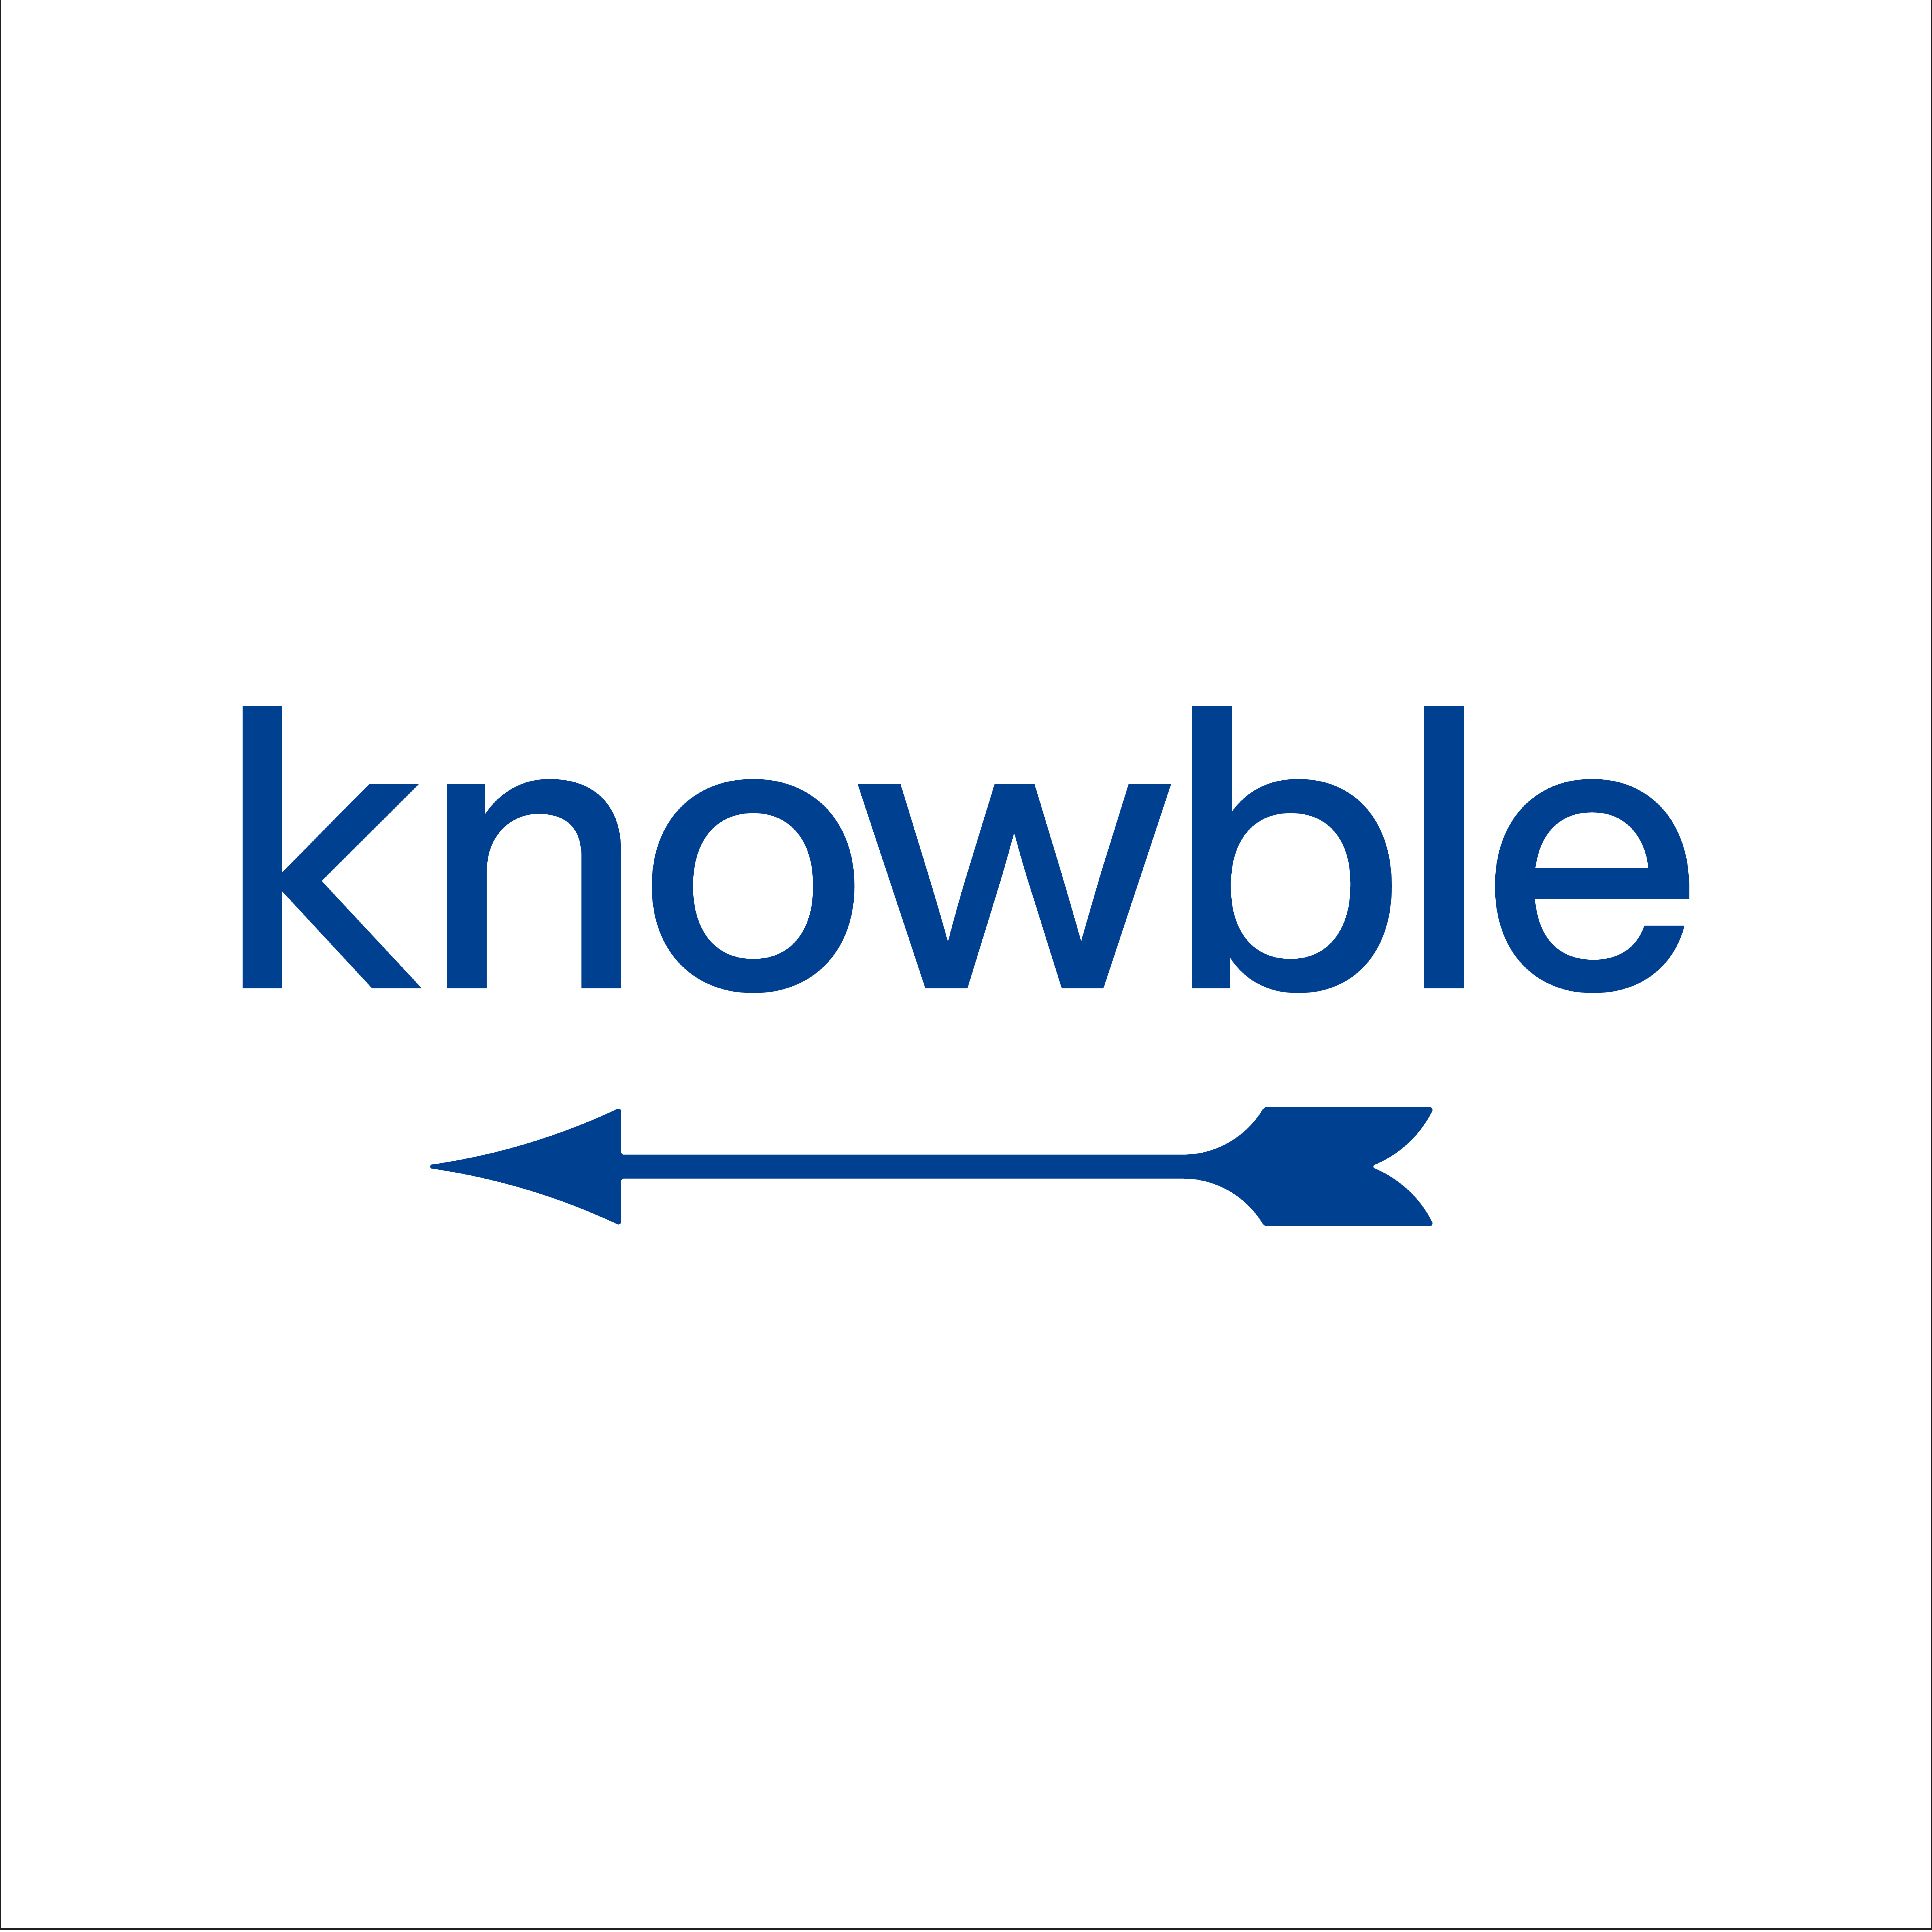 knowble Brand Identity logo design by logo designer DSR Branding for your inspiration and for the worlds largest logo competition